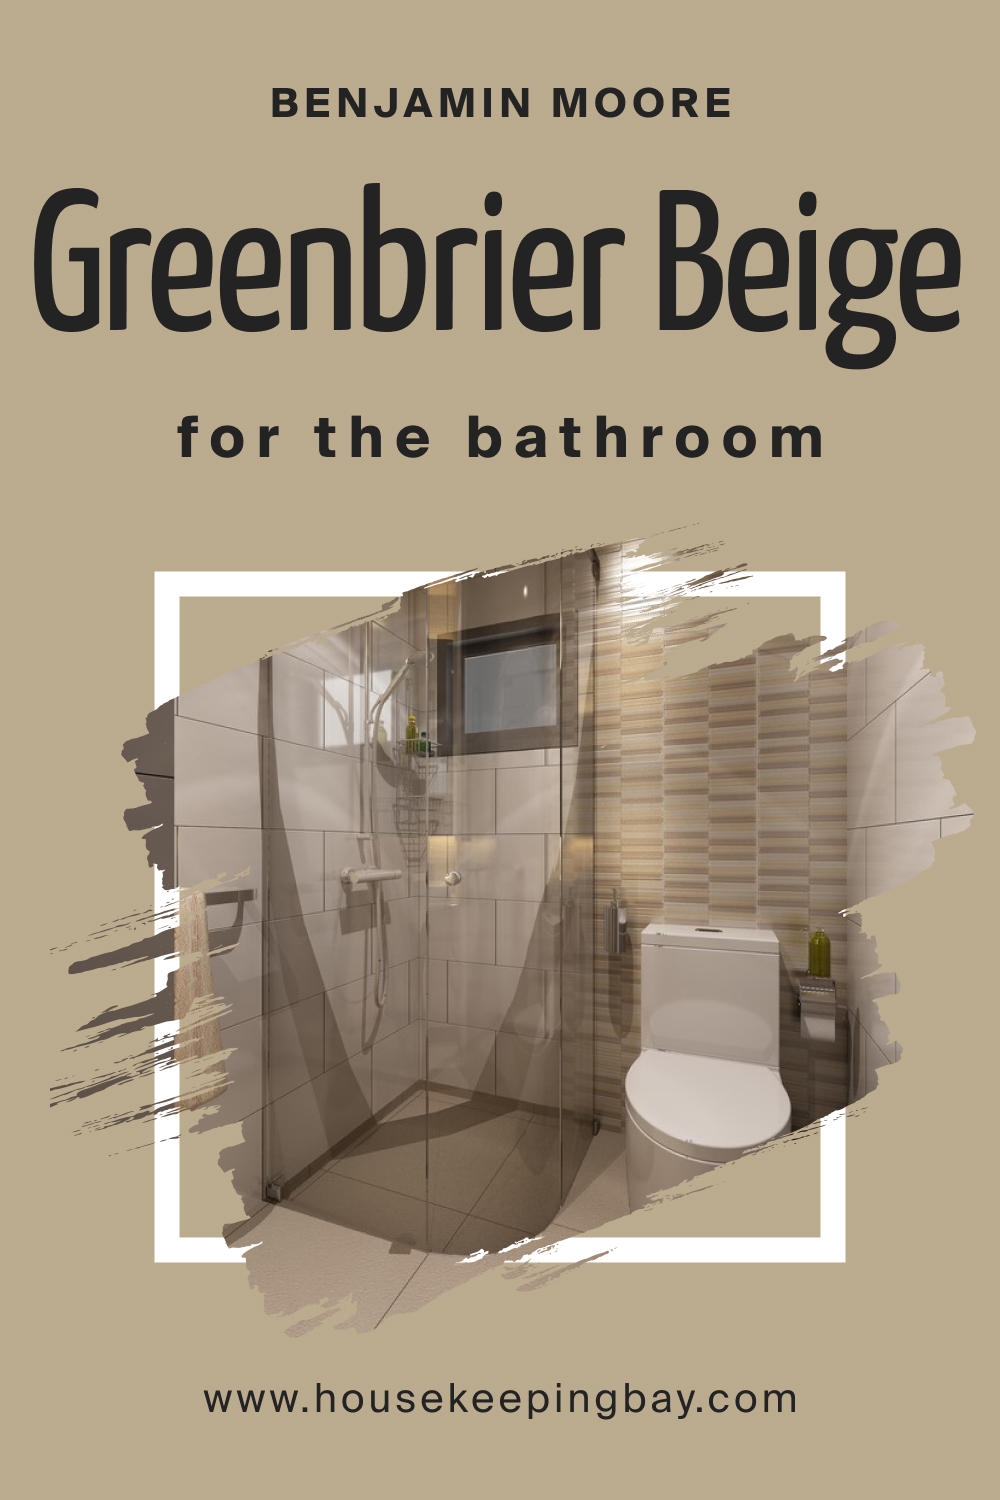 How to Use BM Greenbrier Beige HC-79 in the Bathroom?